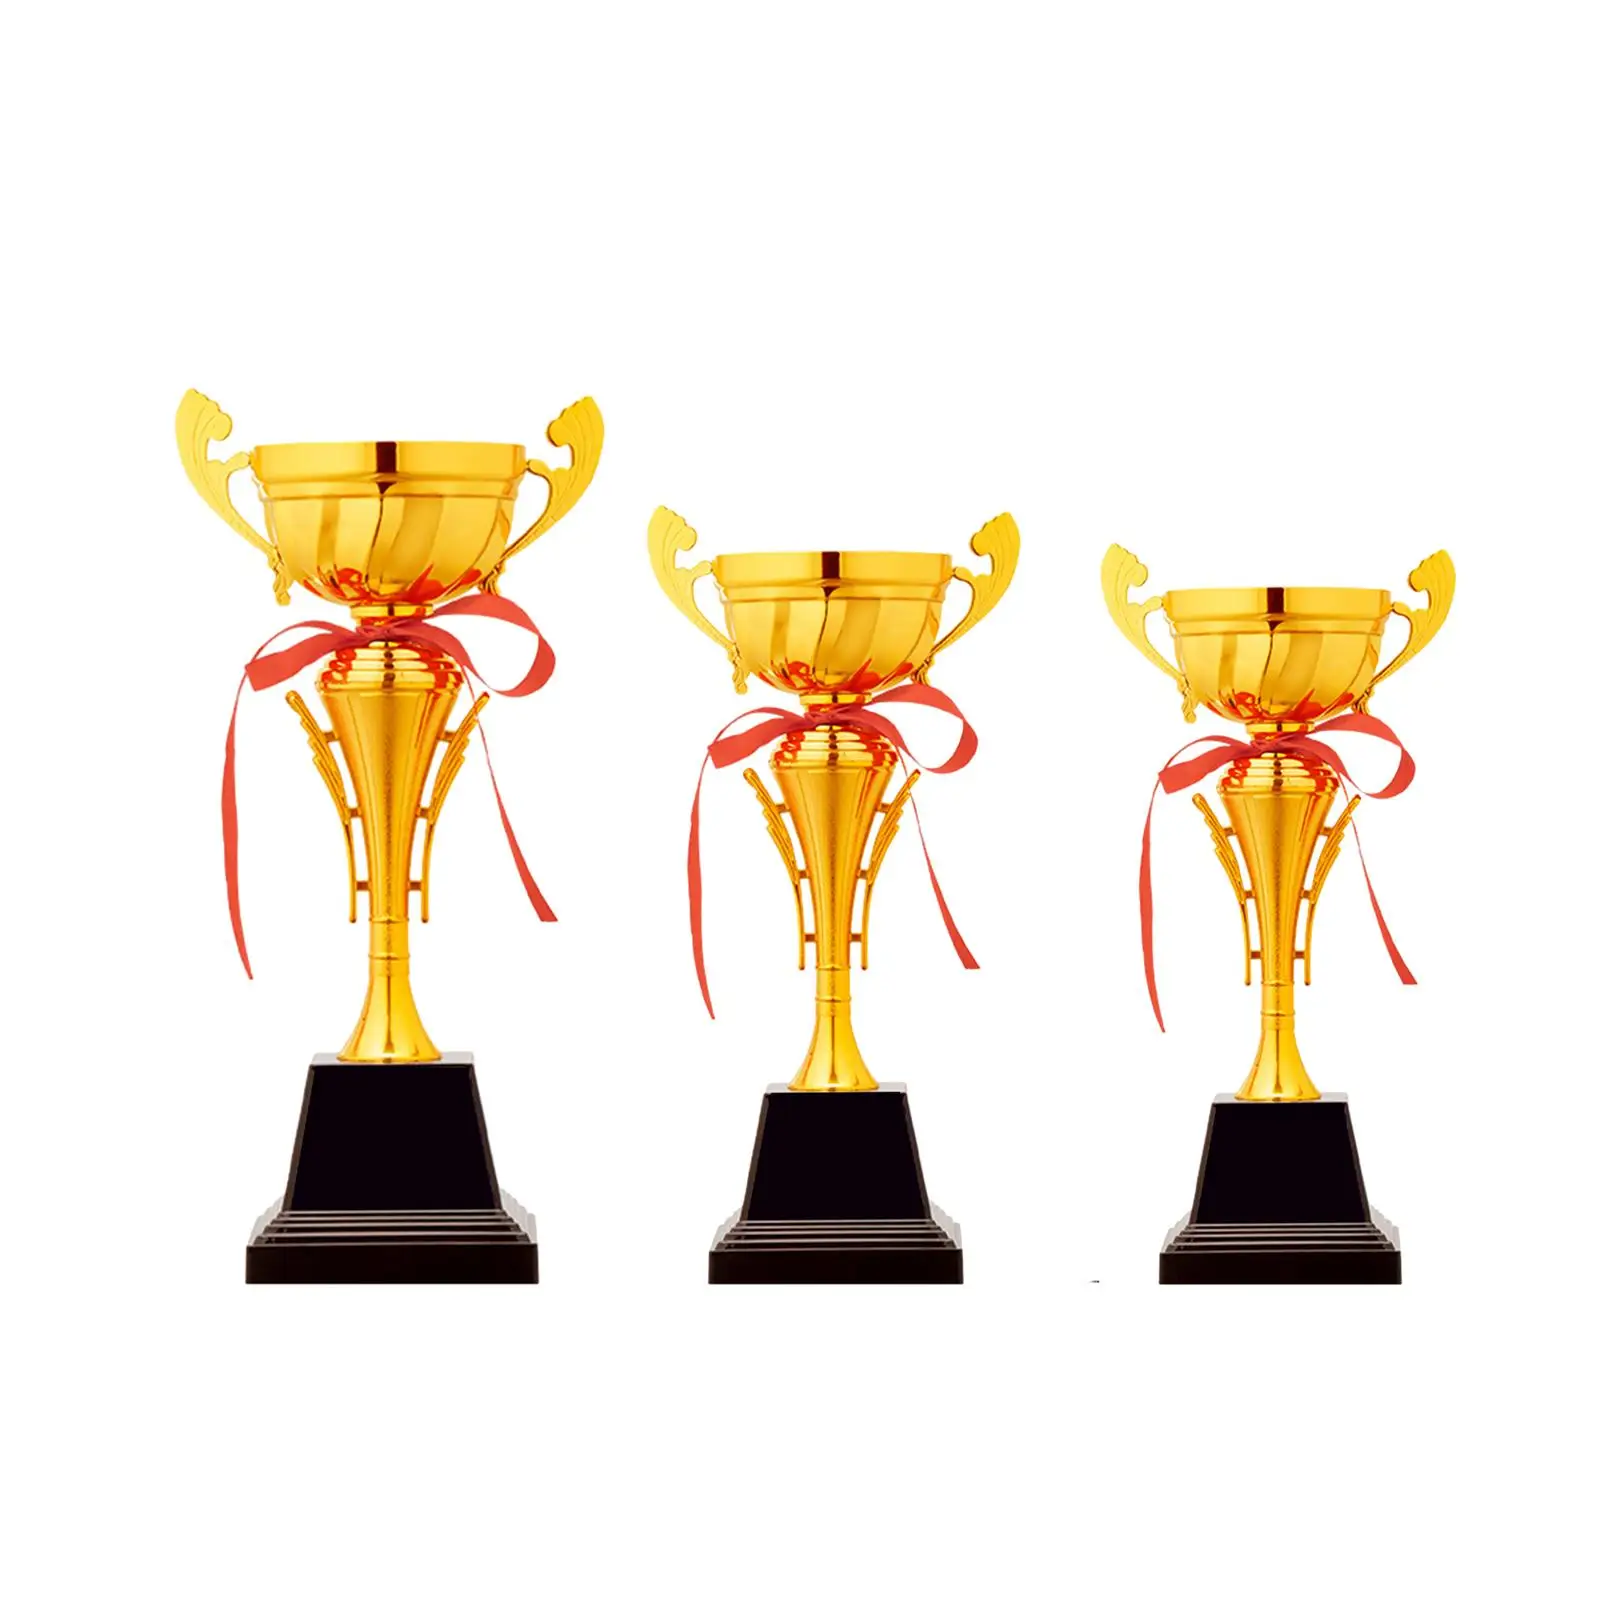 Gold Trophy First Place Reward Prize Sports Championship Metal Trophy Cup for Sports Tournaments Celebrations Party Performances